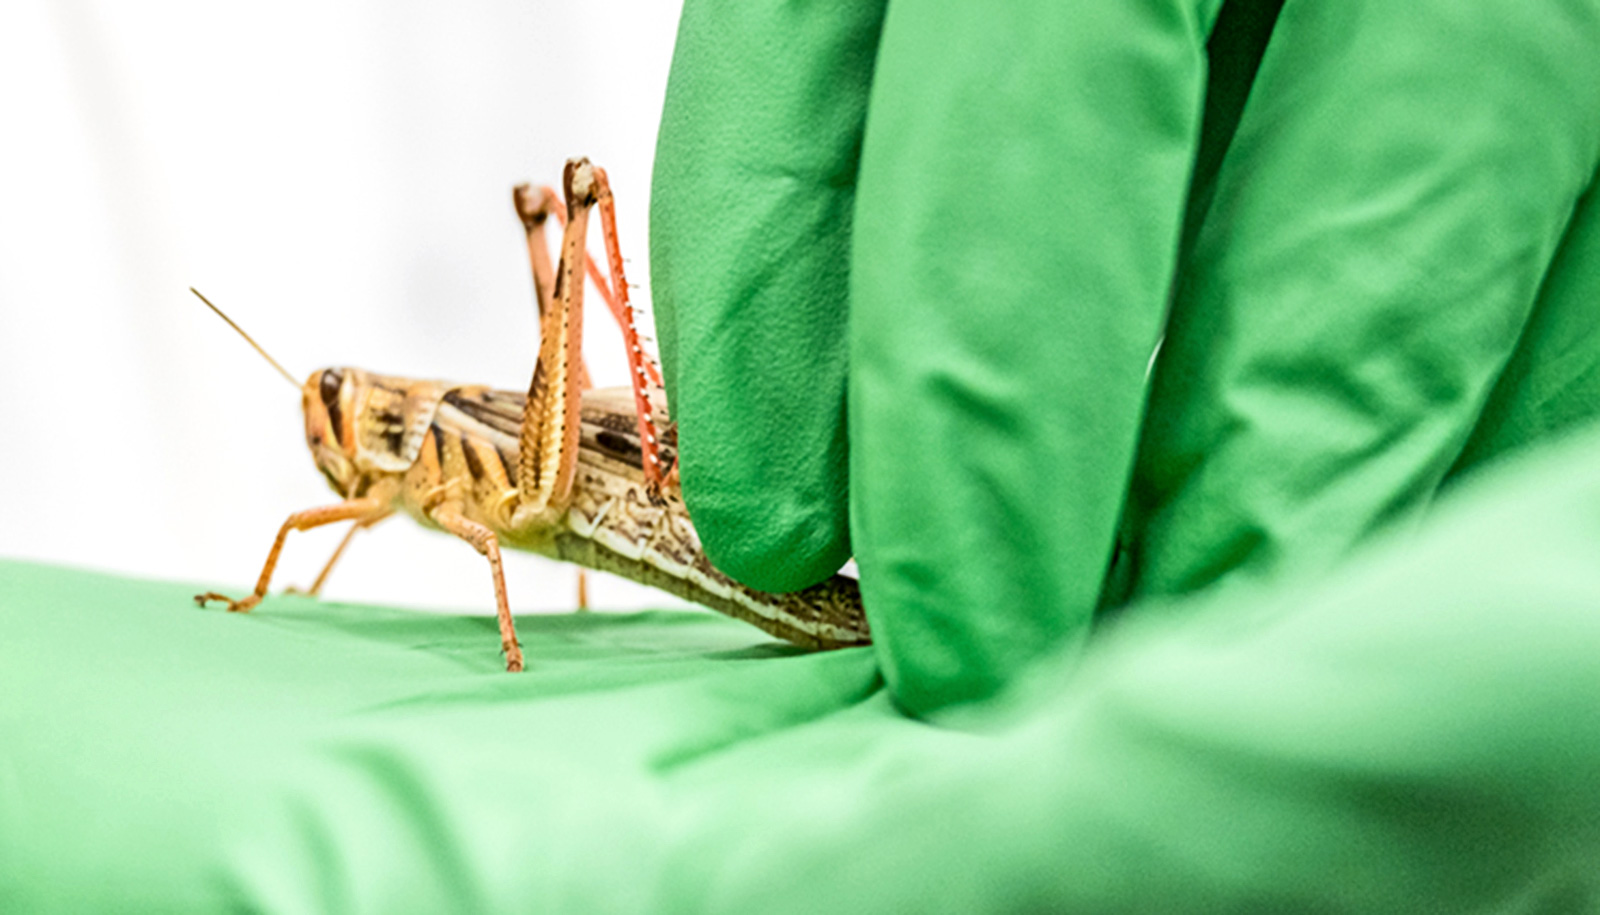 Locusts can ‘smell’ human cancer cells | Futurity